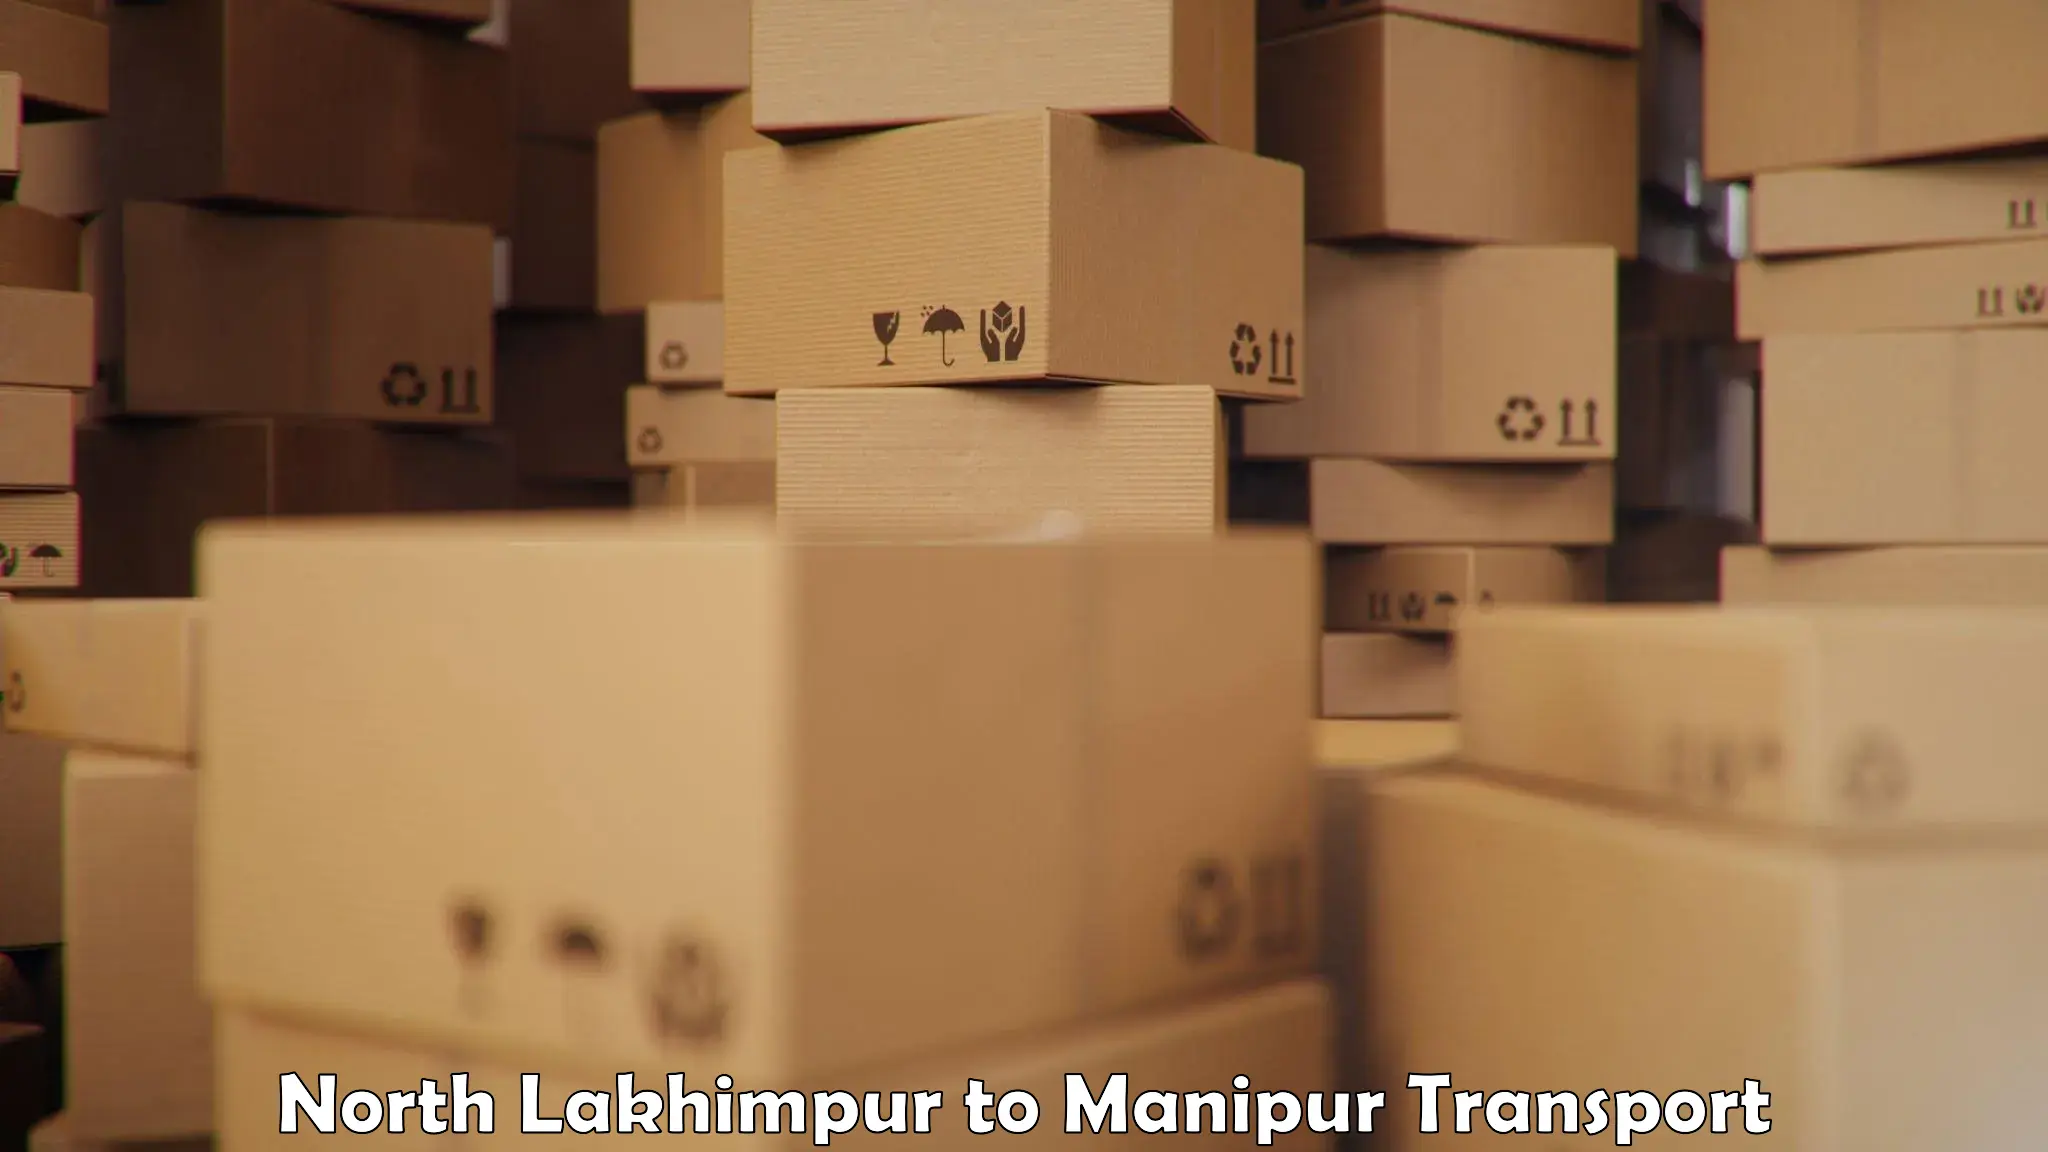 Commercial transport service North Lakhimpur to Manipur